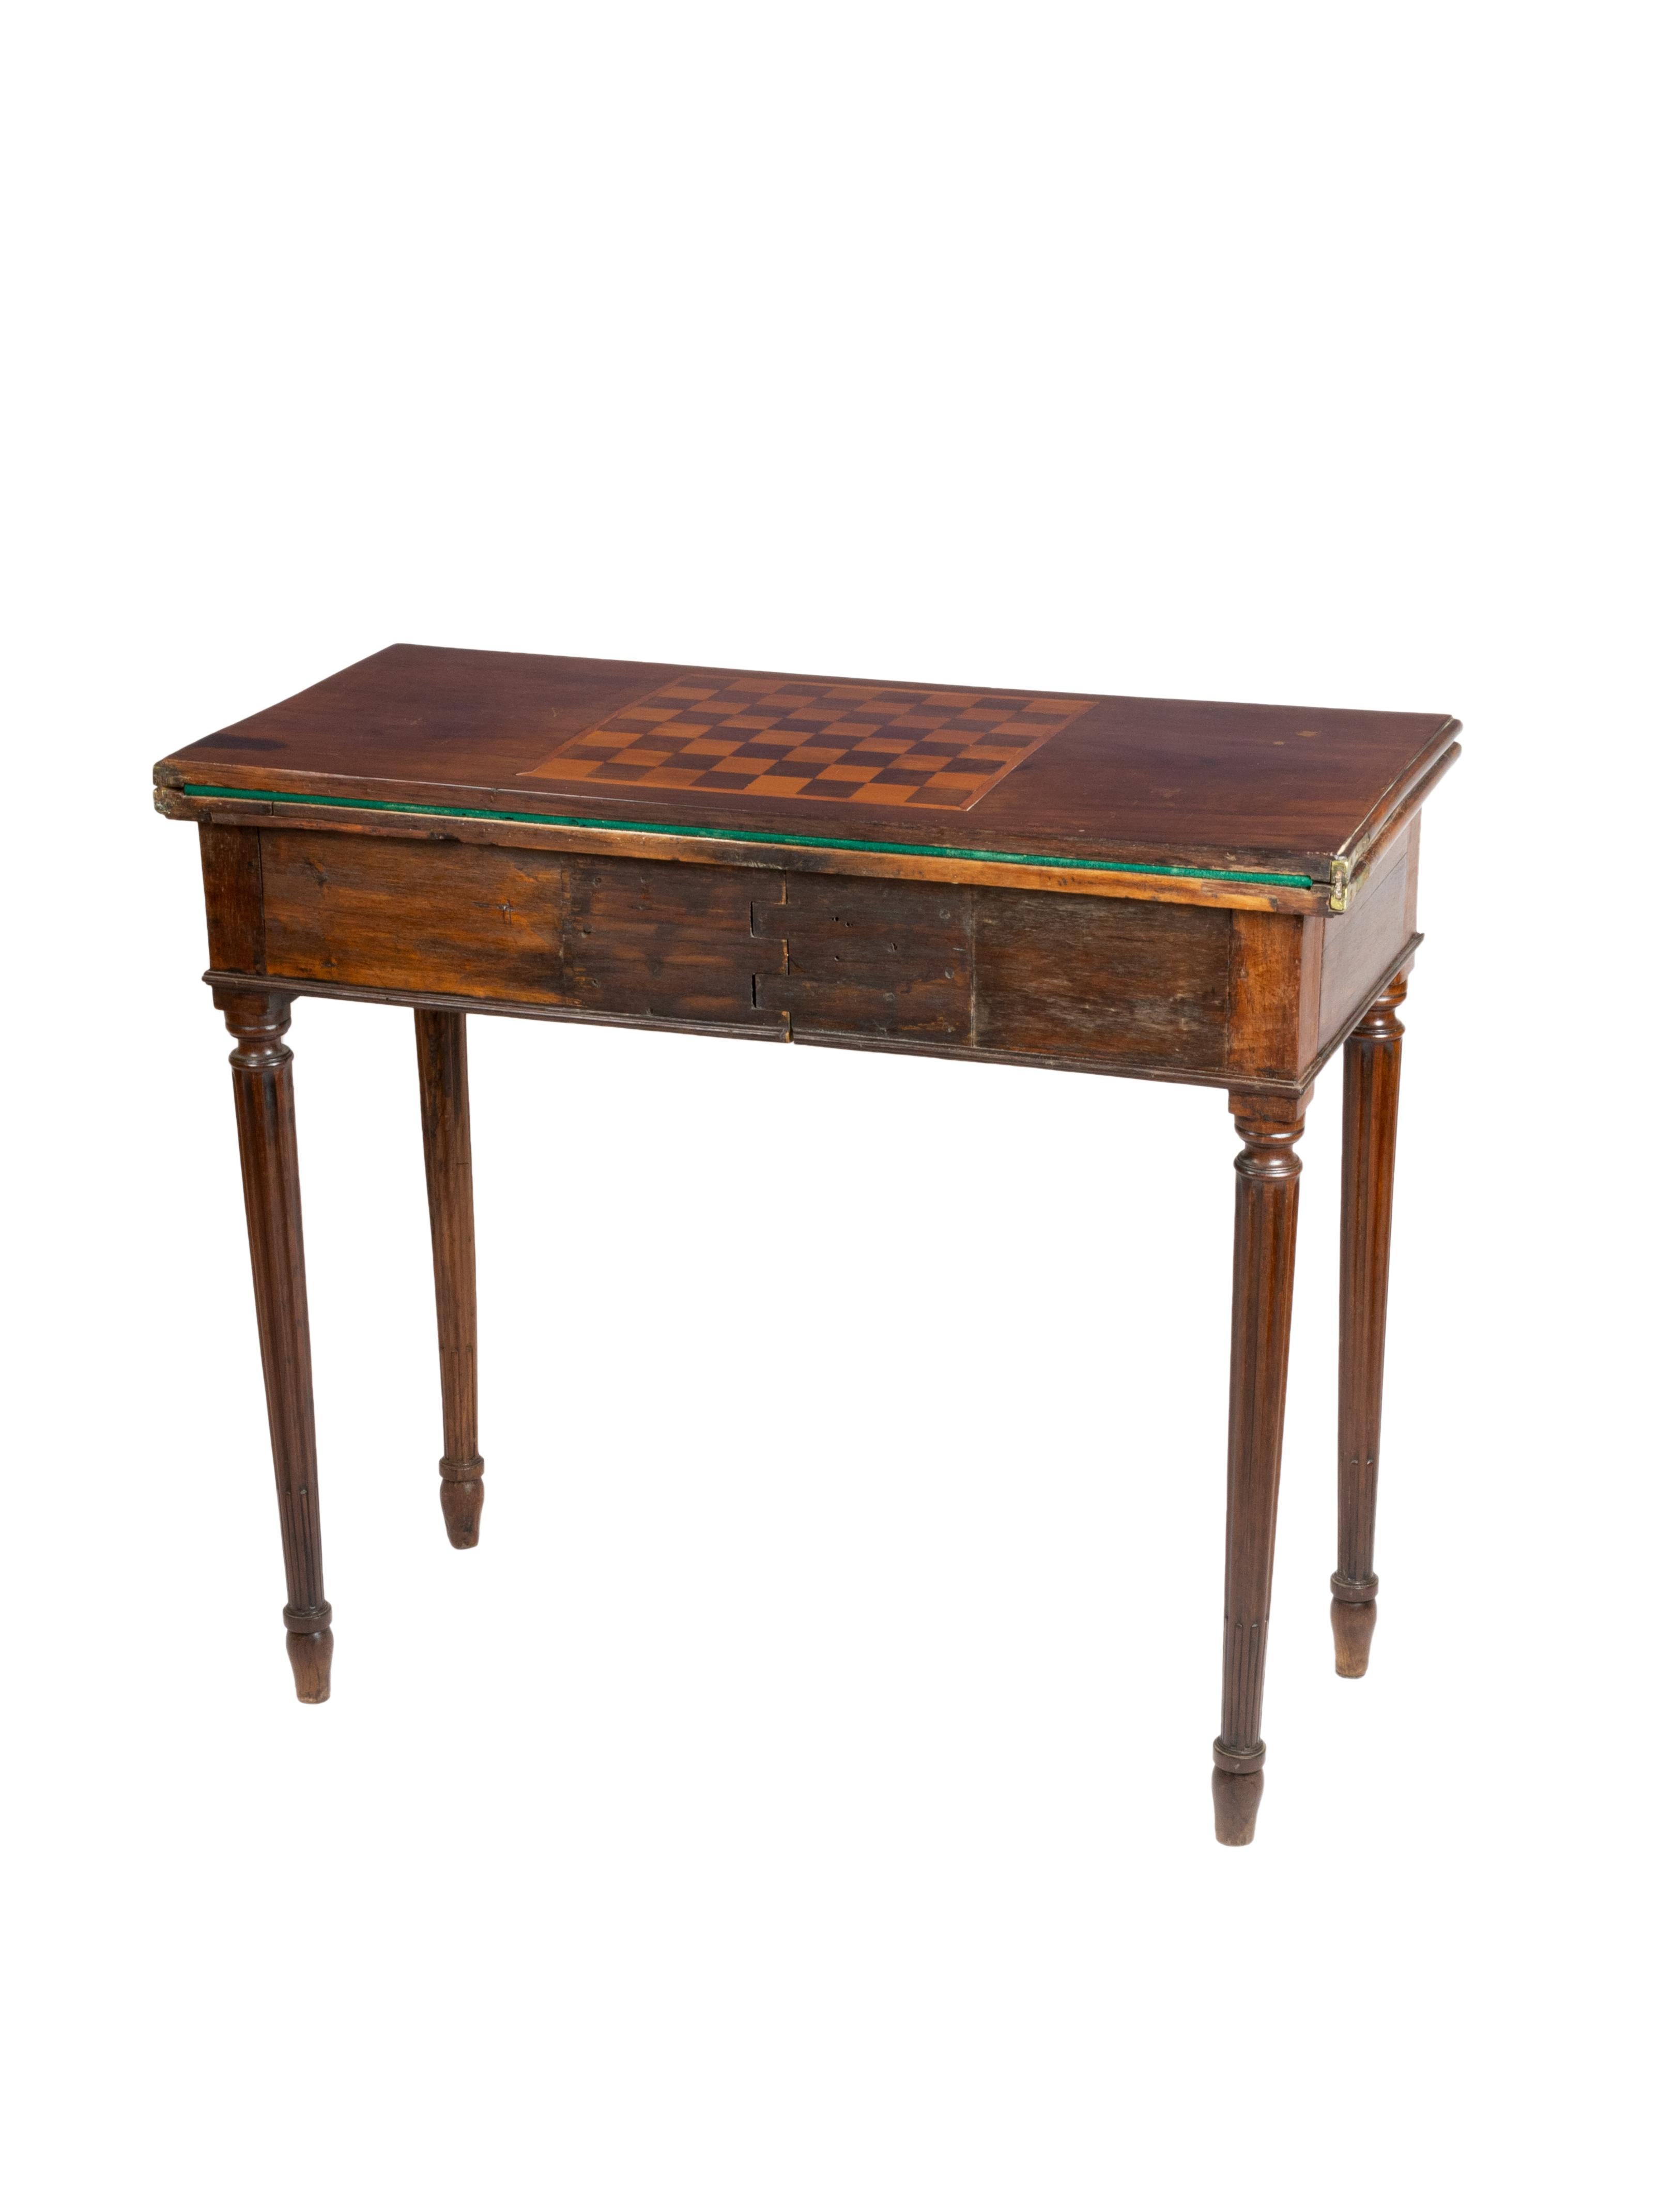 Period Georgian Mahogany Card Chess Table Console For Sale 2